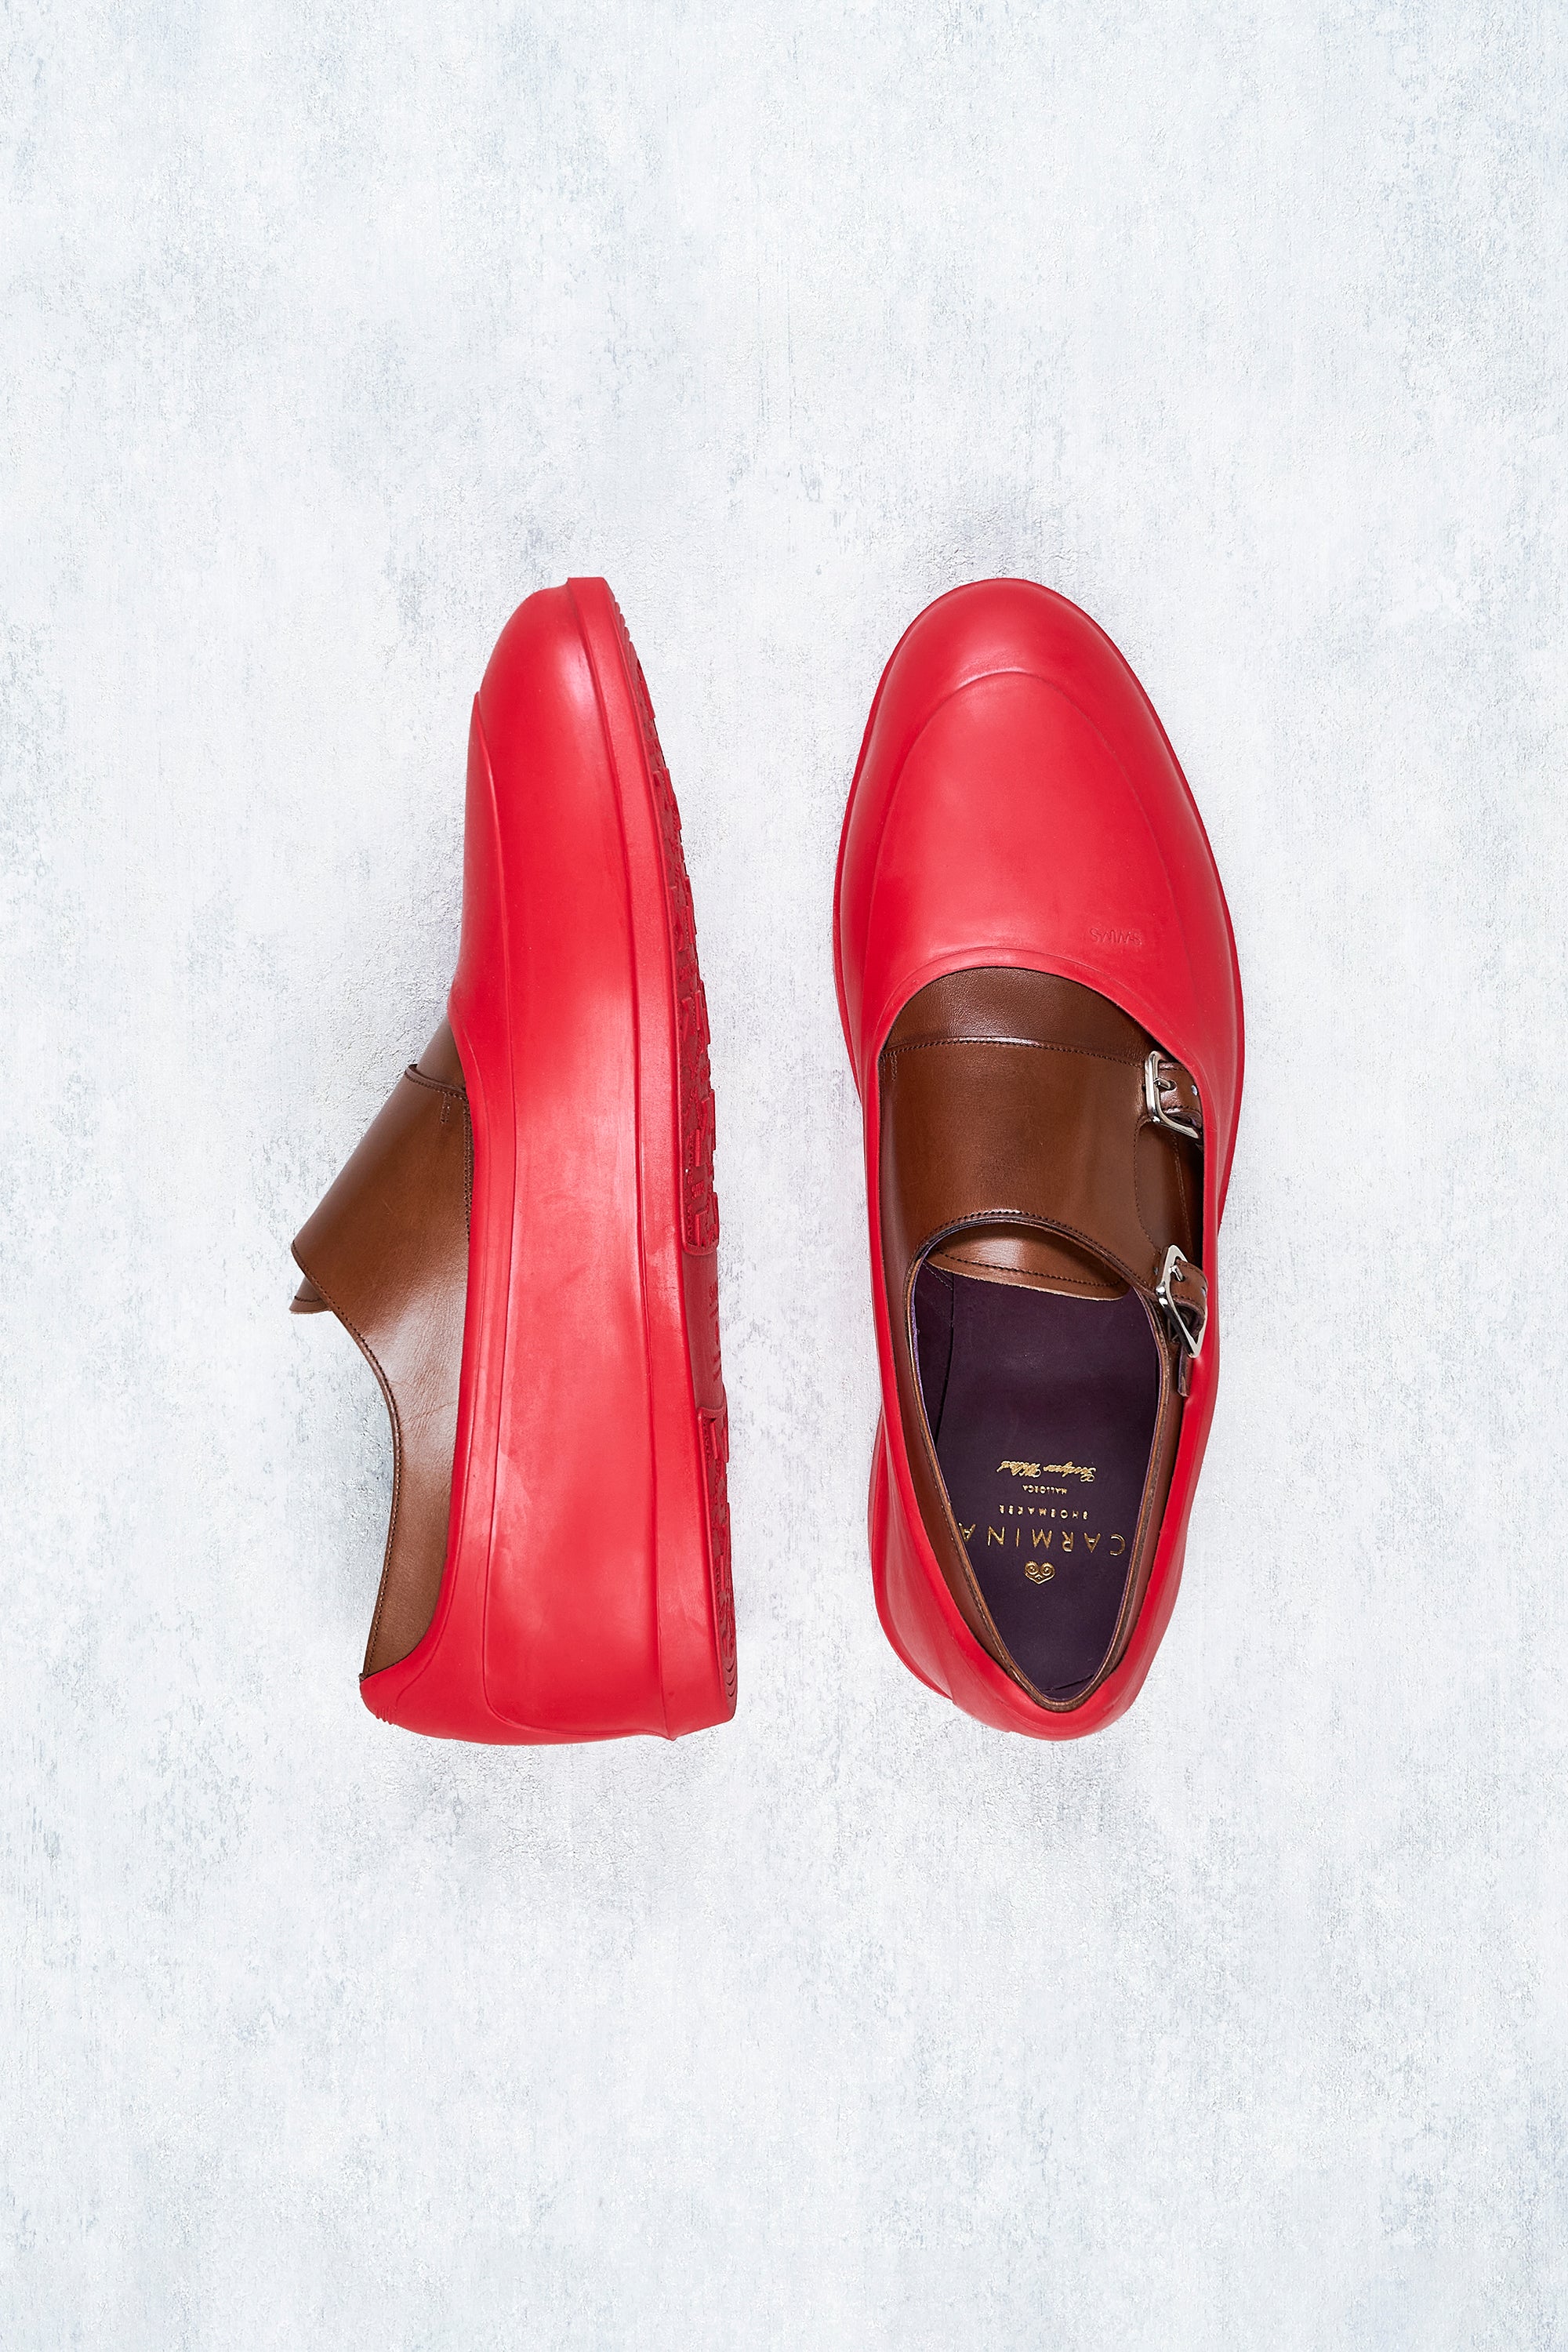 Swims 11101 Classic Red Galoshes